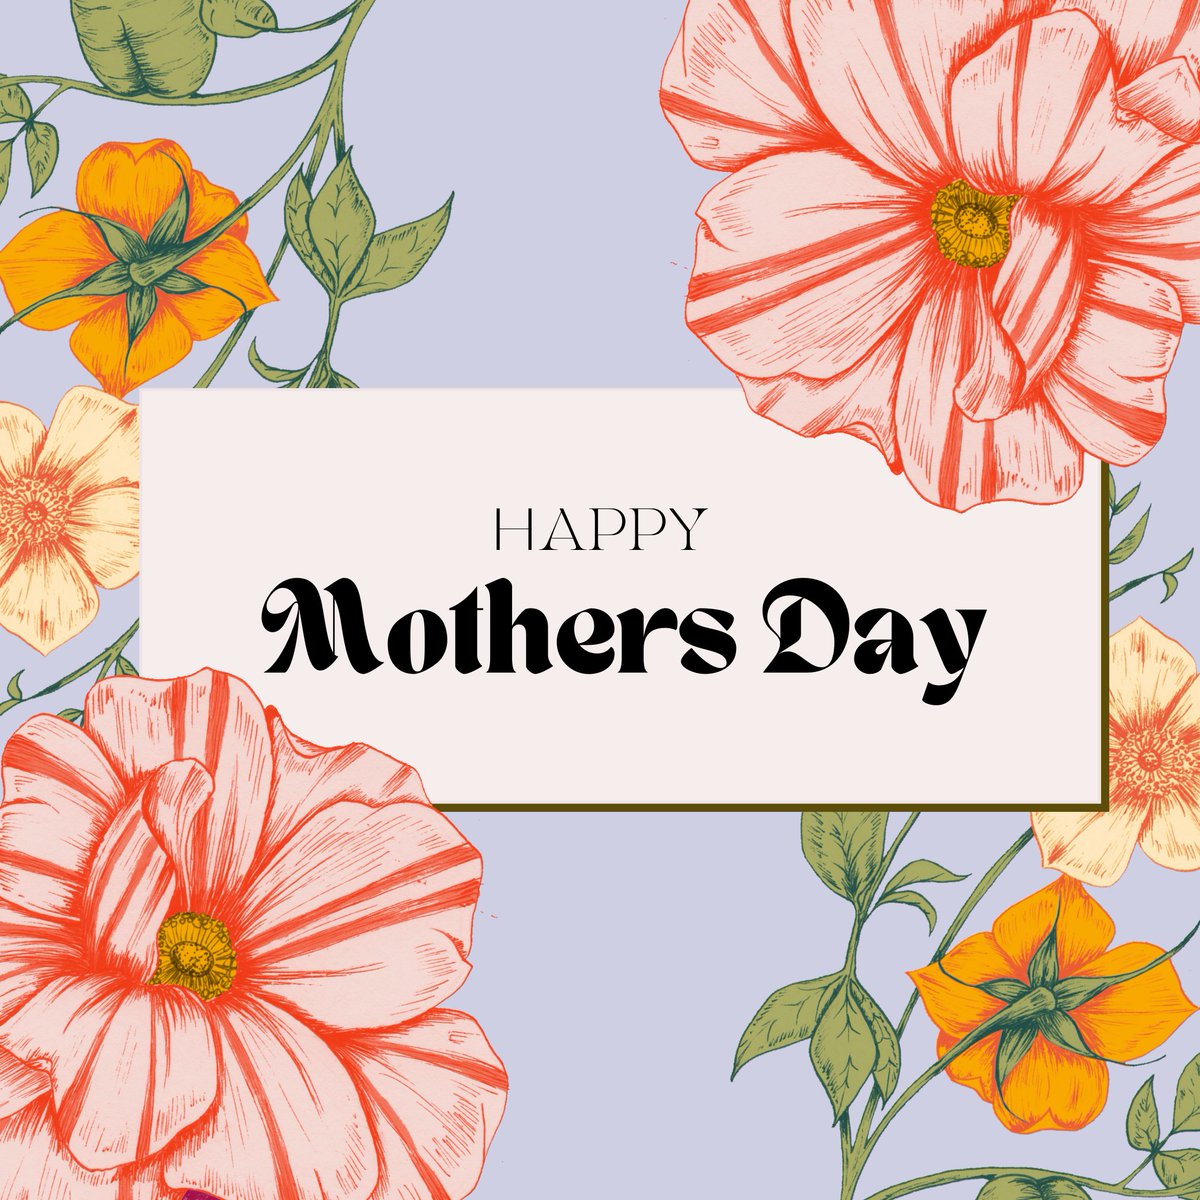 Wishing all the moms across Arizona a Happy Mothers' Day! 💐